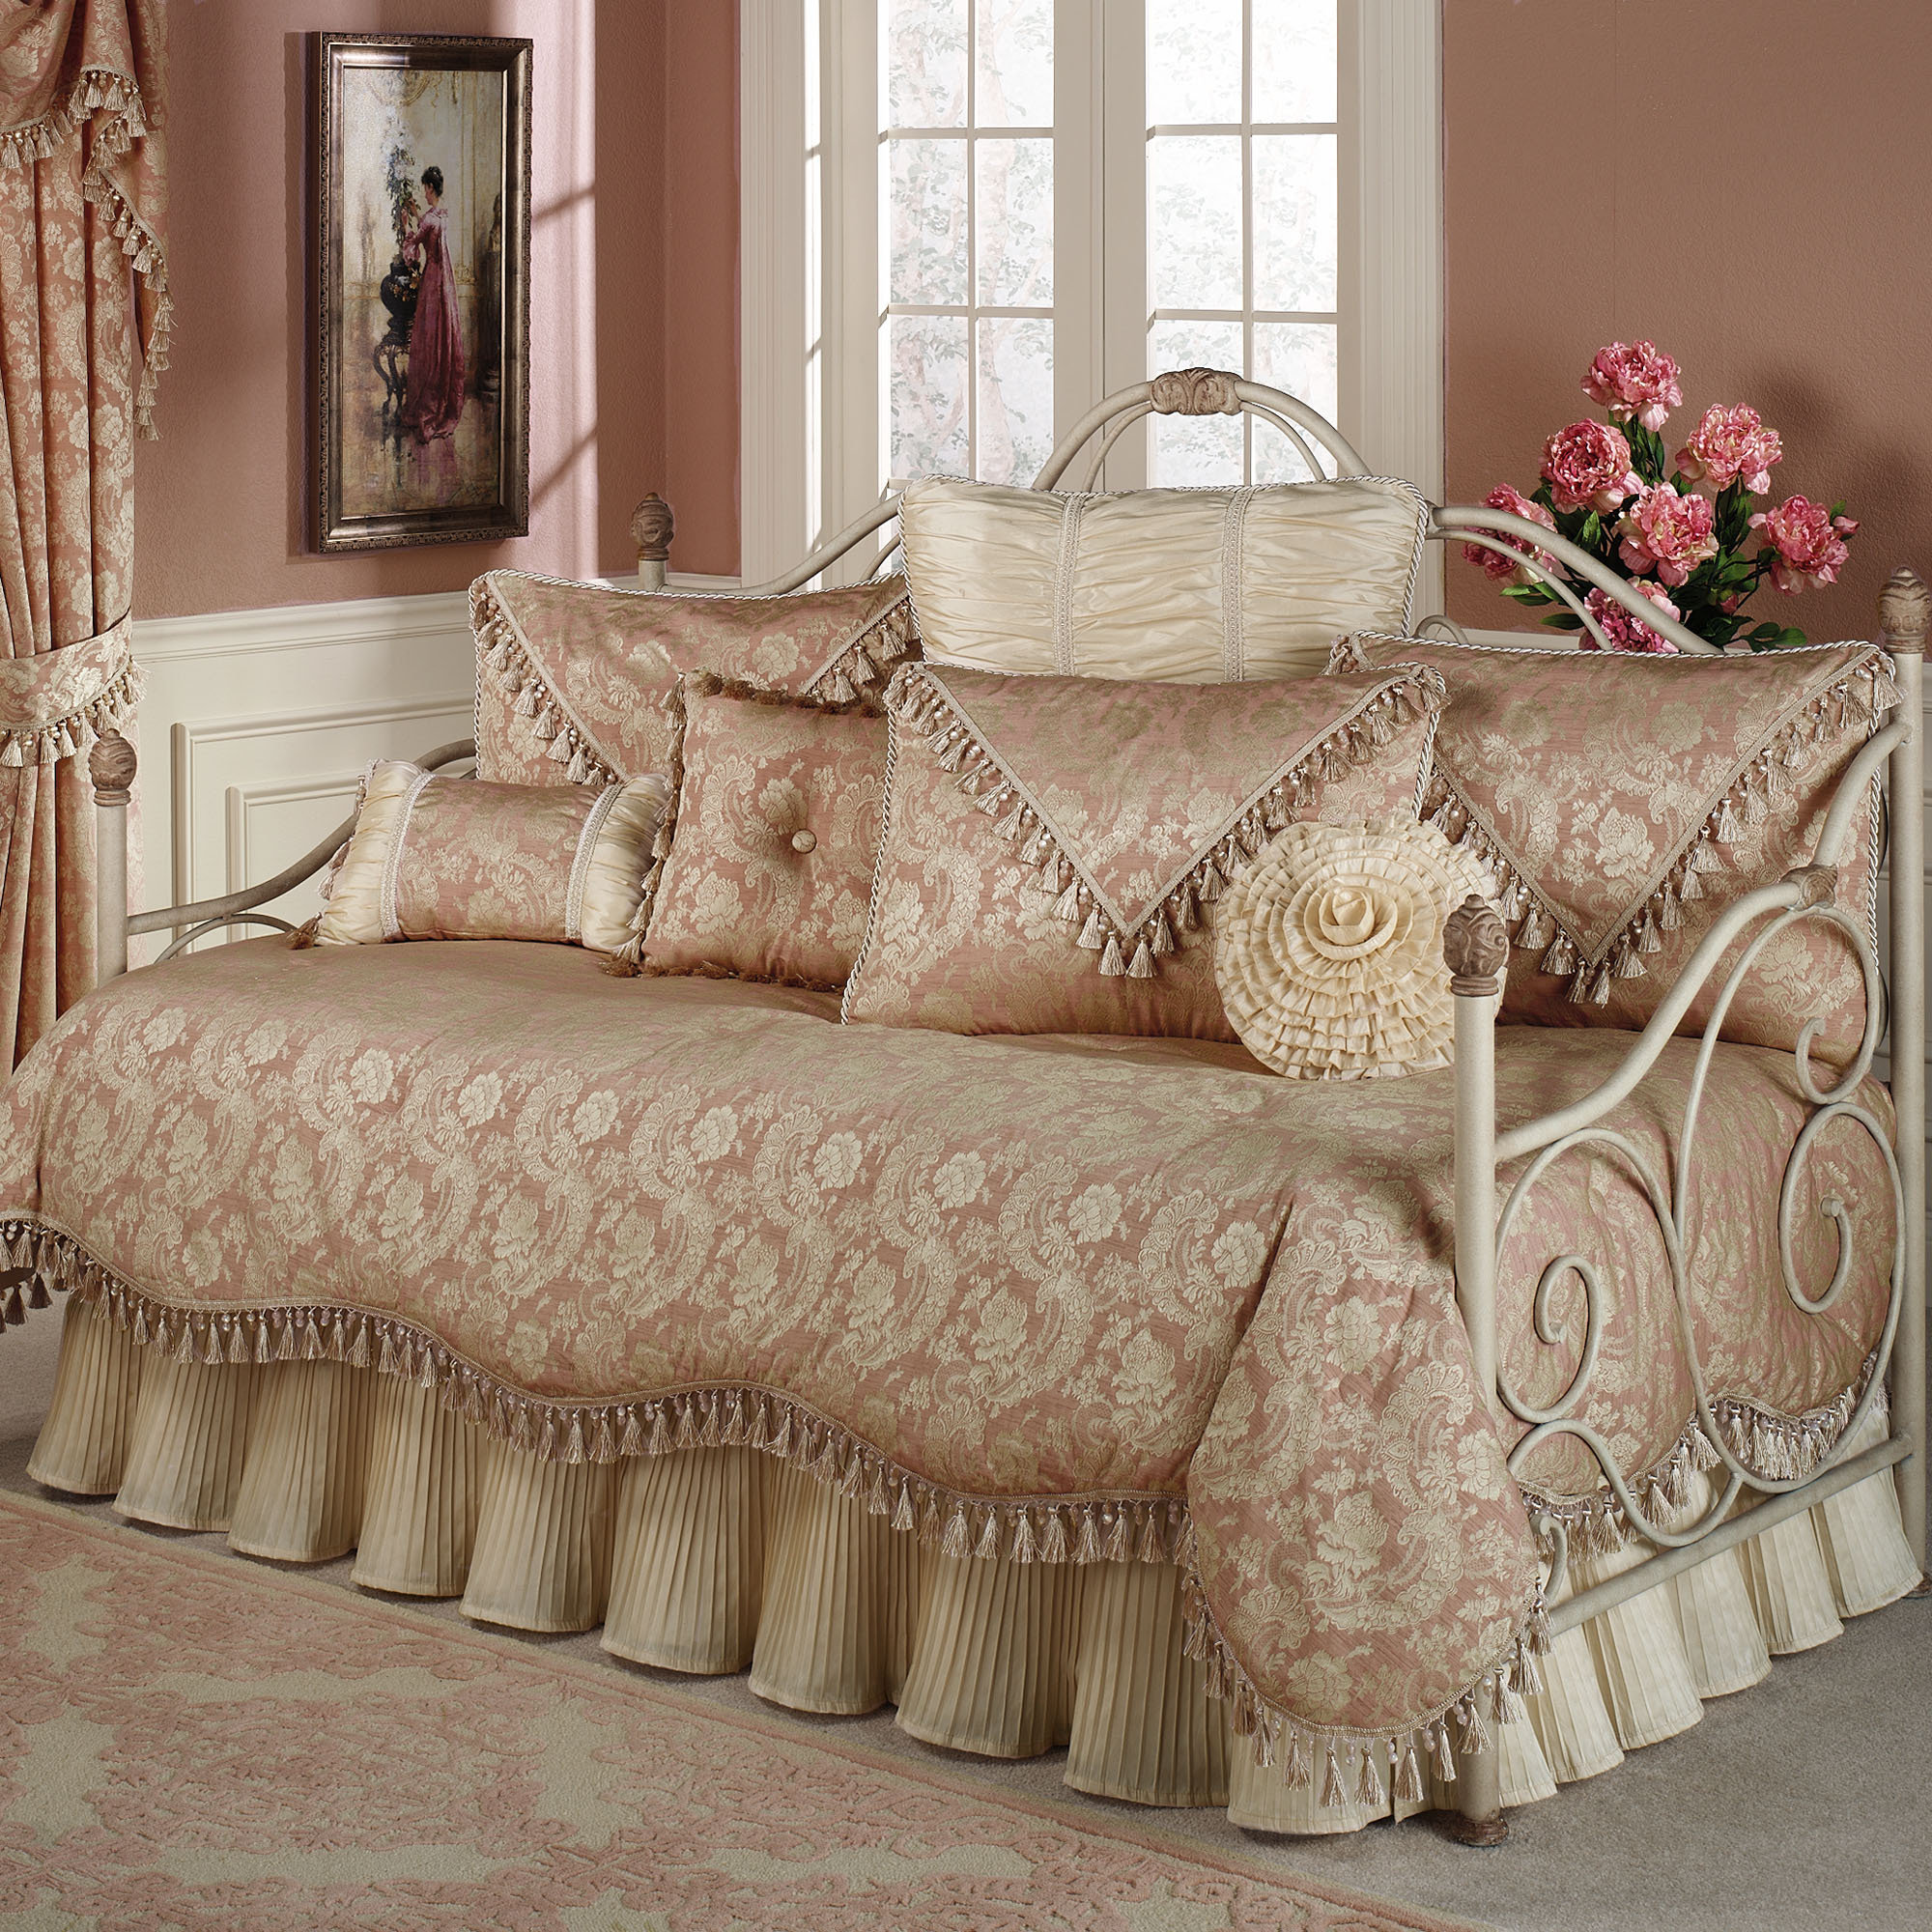 daybed bedding sets clearance photo - 3